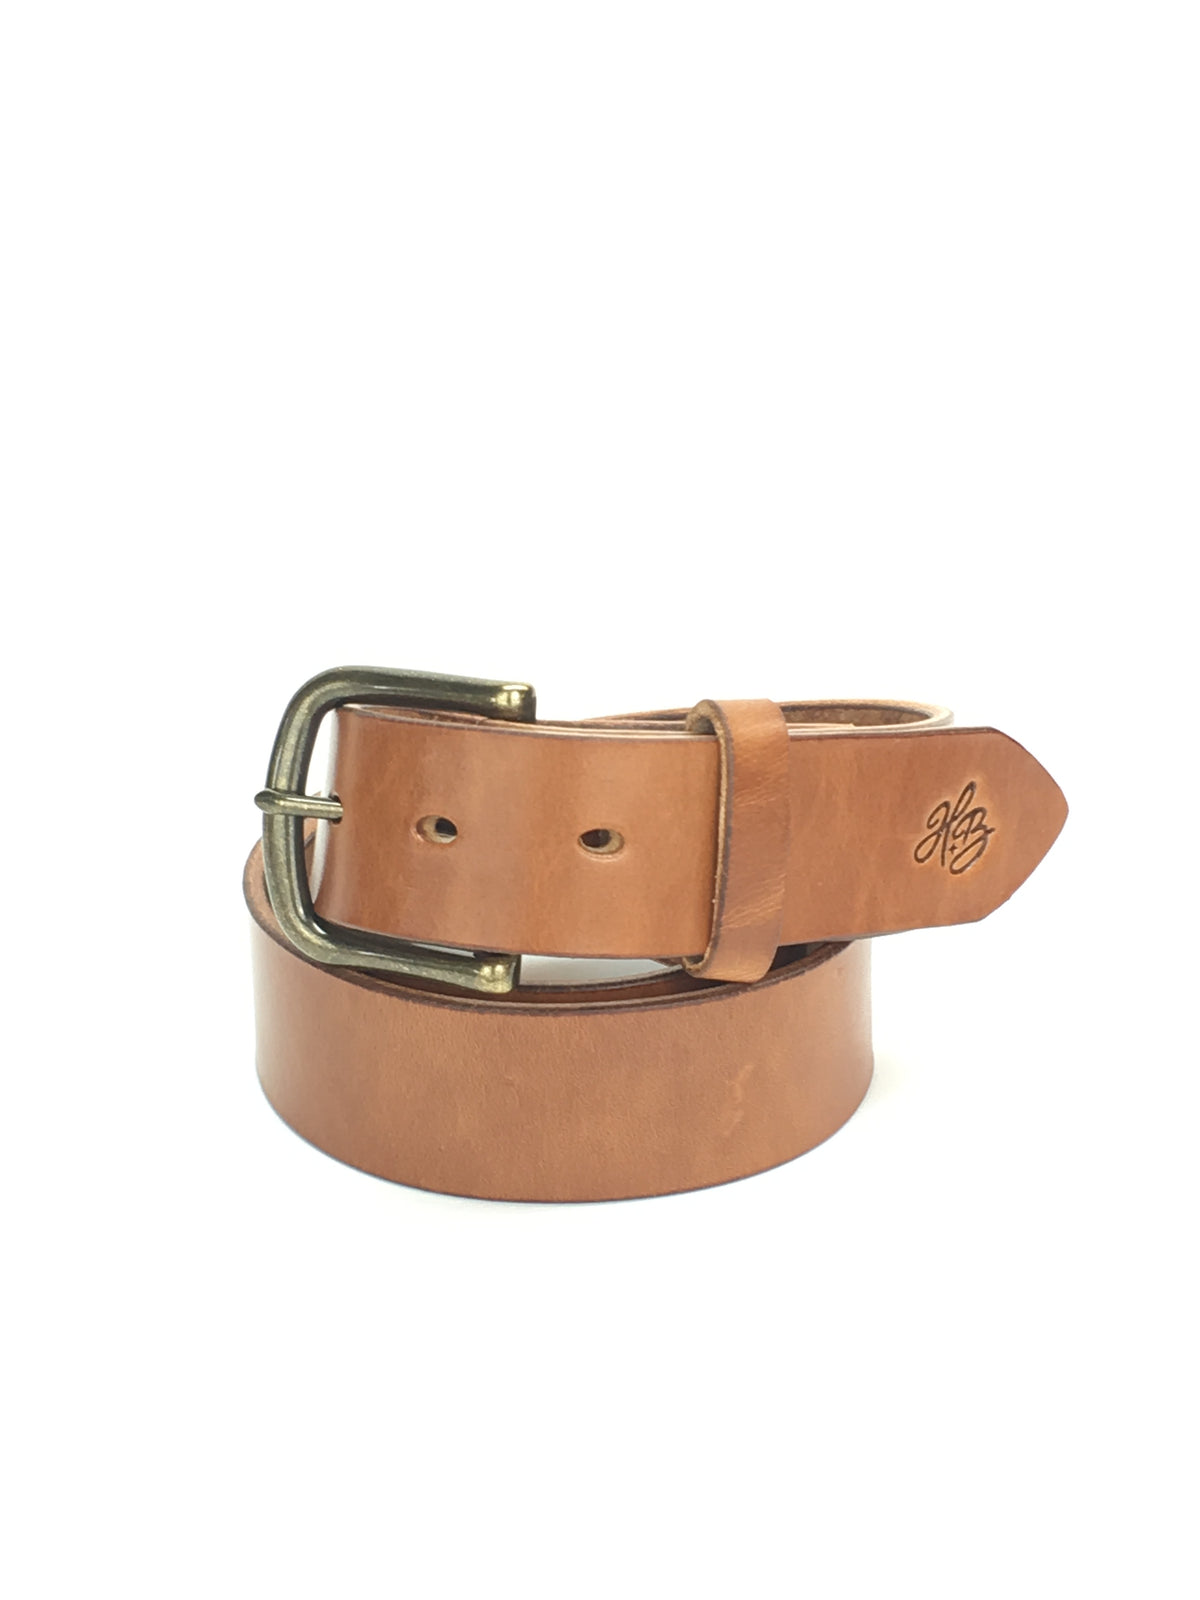 H+B FULL GRAIN LEATHER BELTS - BUCK BROWN LEATHER